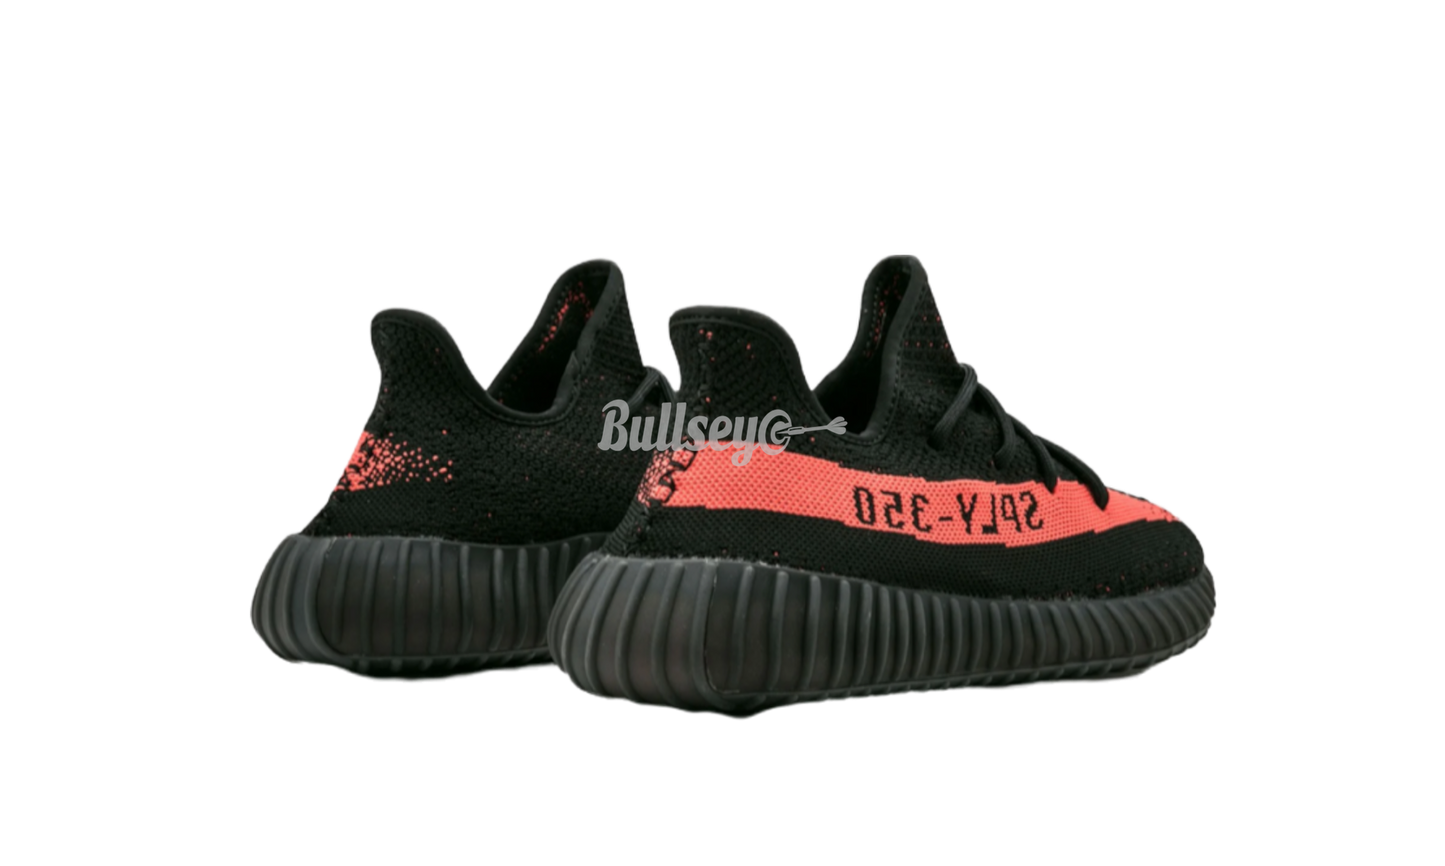 Adidas Yeezy Boost 350 V2 "Core Black Red/Red Stripe"